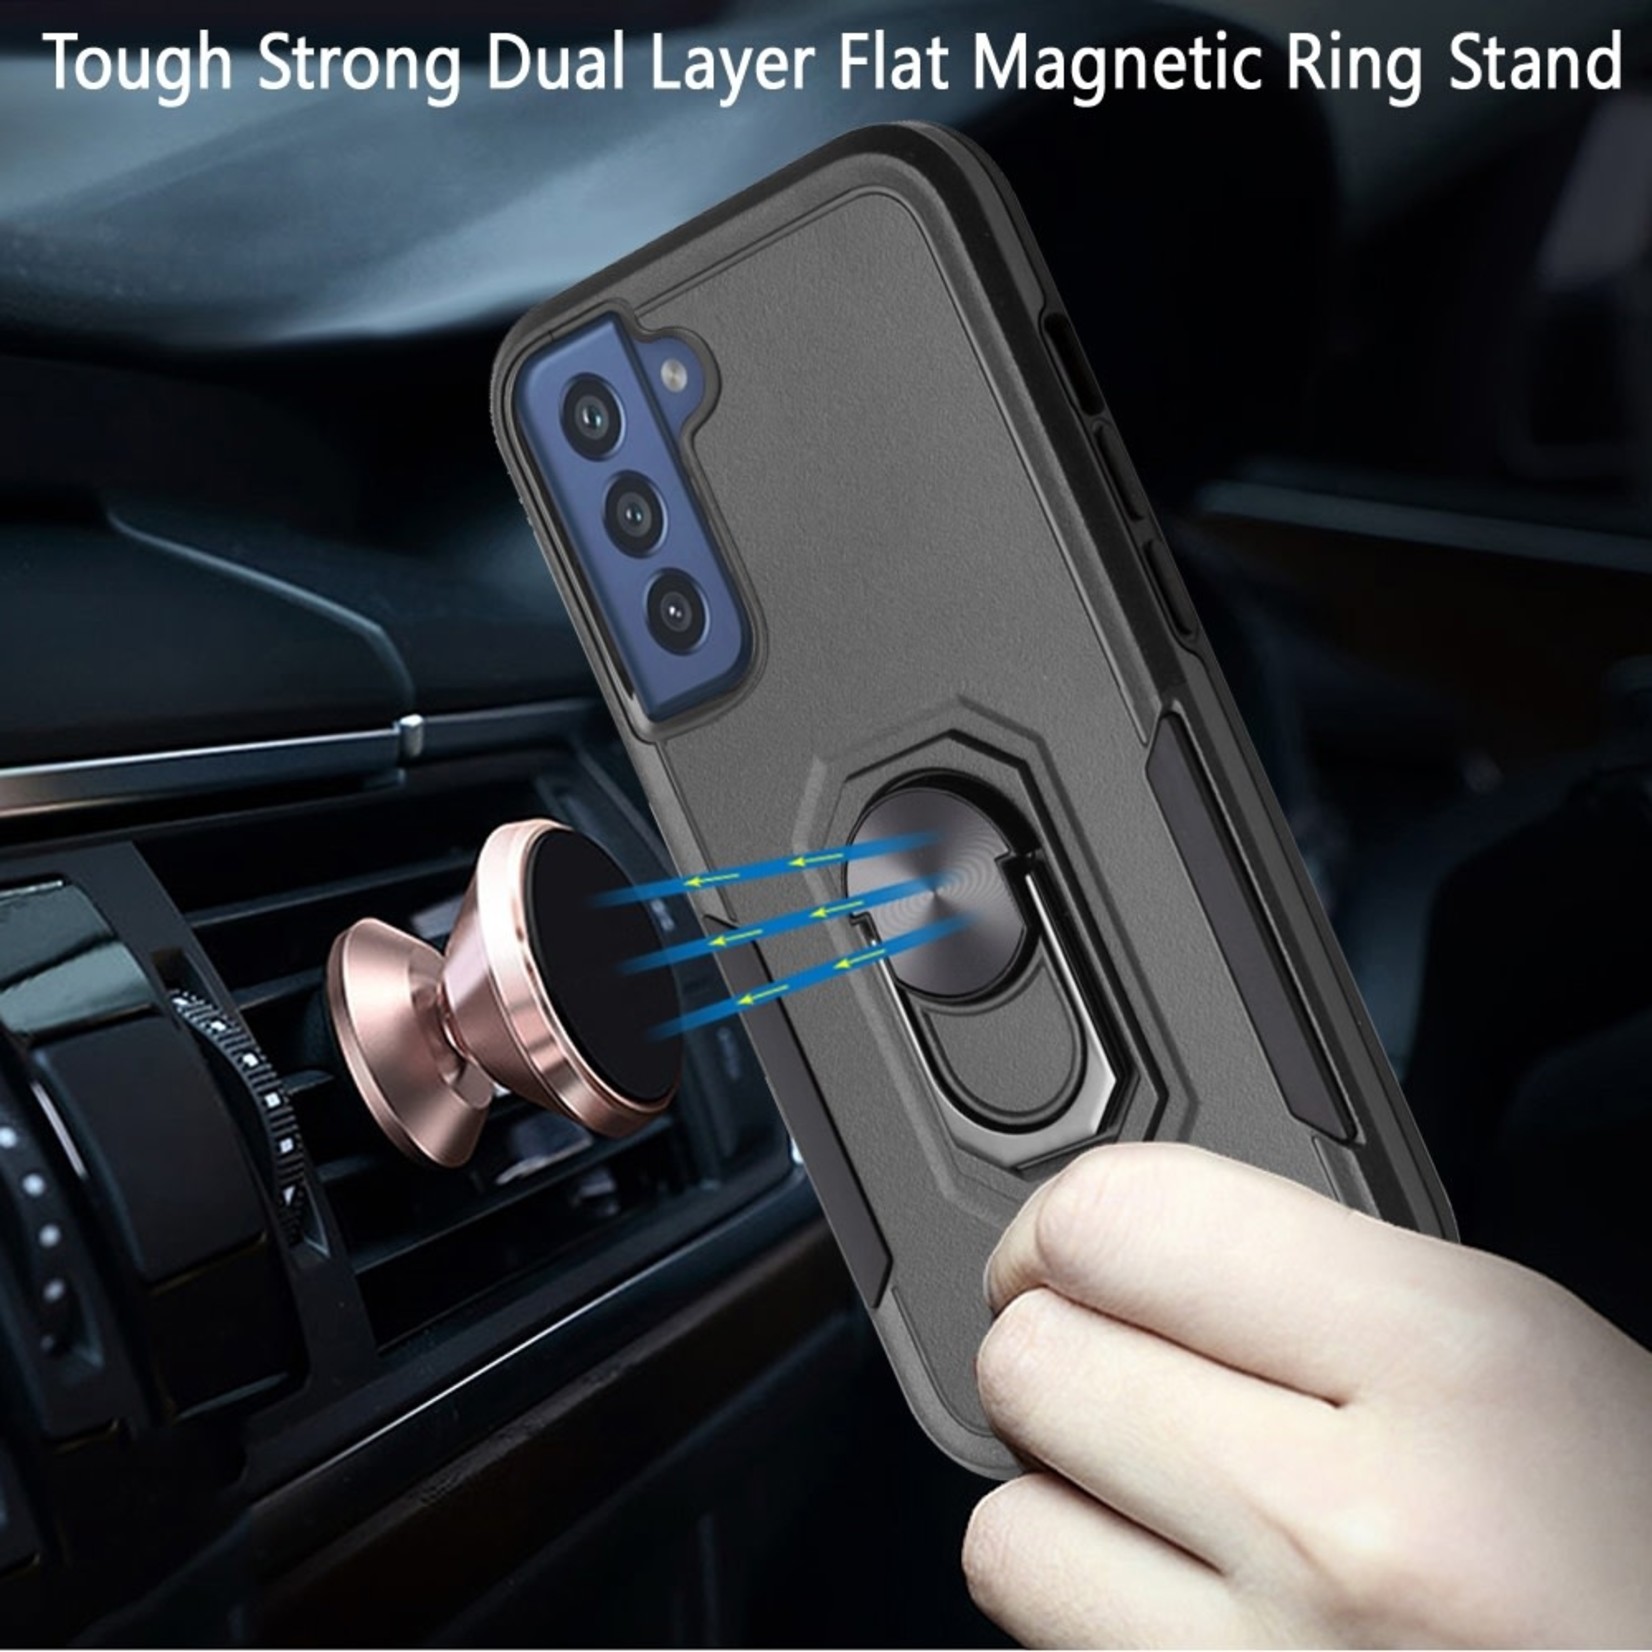 Samsung Tough Strong Dual Layer Flat Magnetic Ring Stand Case Cover - Black For Samsung Galaxy S22 Ultra